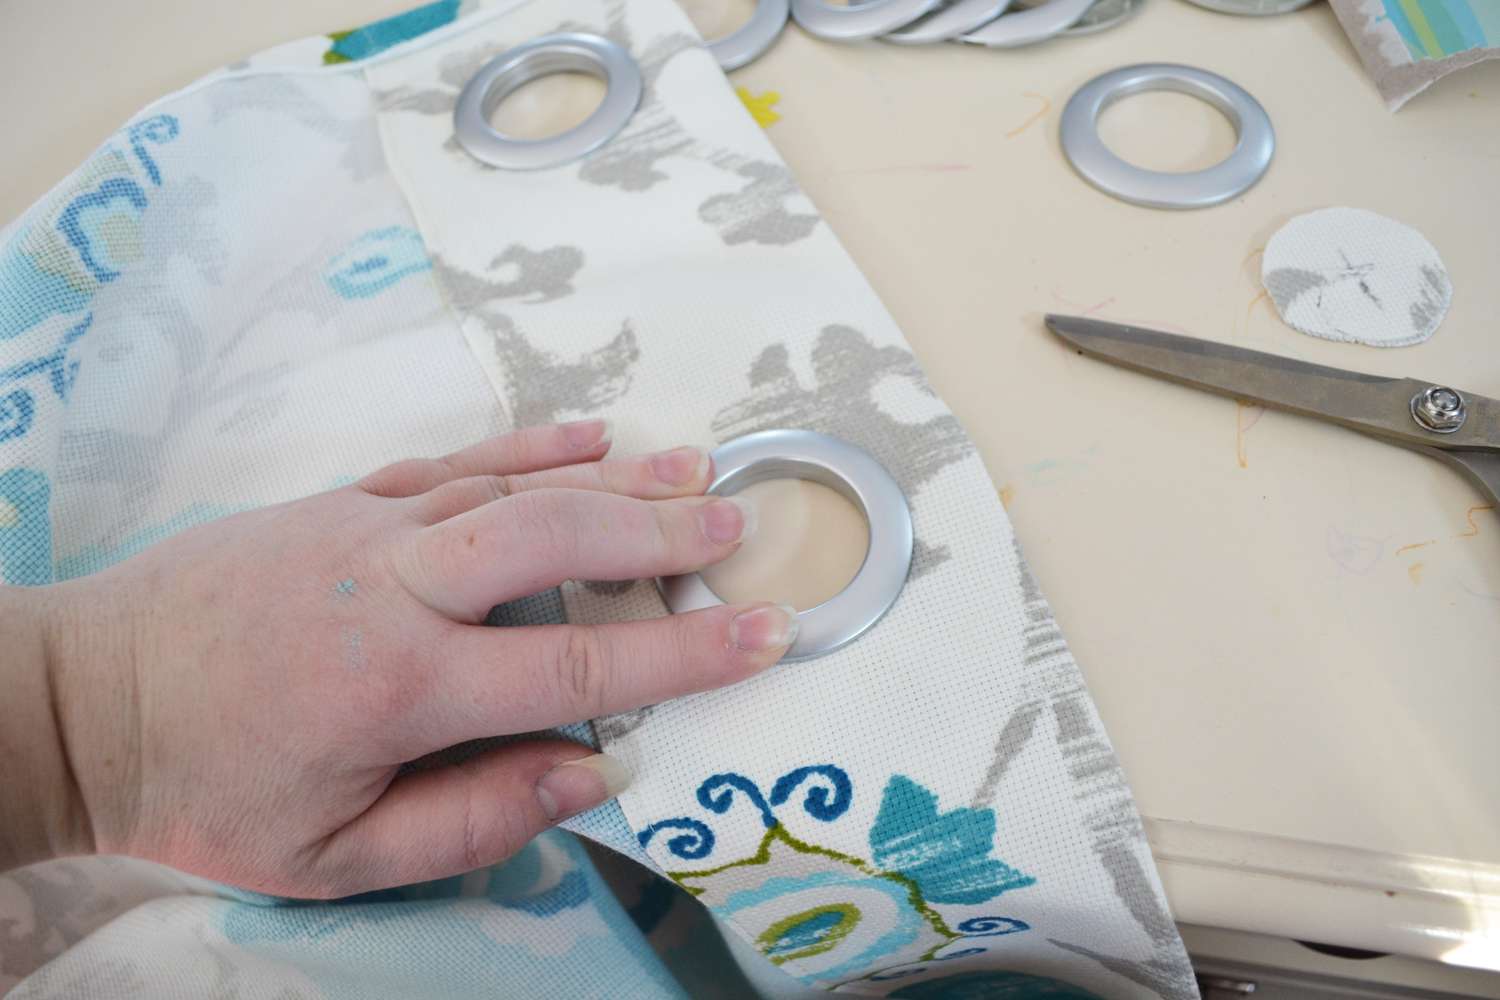 How To Clean A Shower Curtain Liner Grommet Valances for